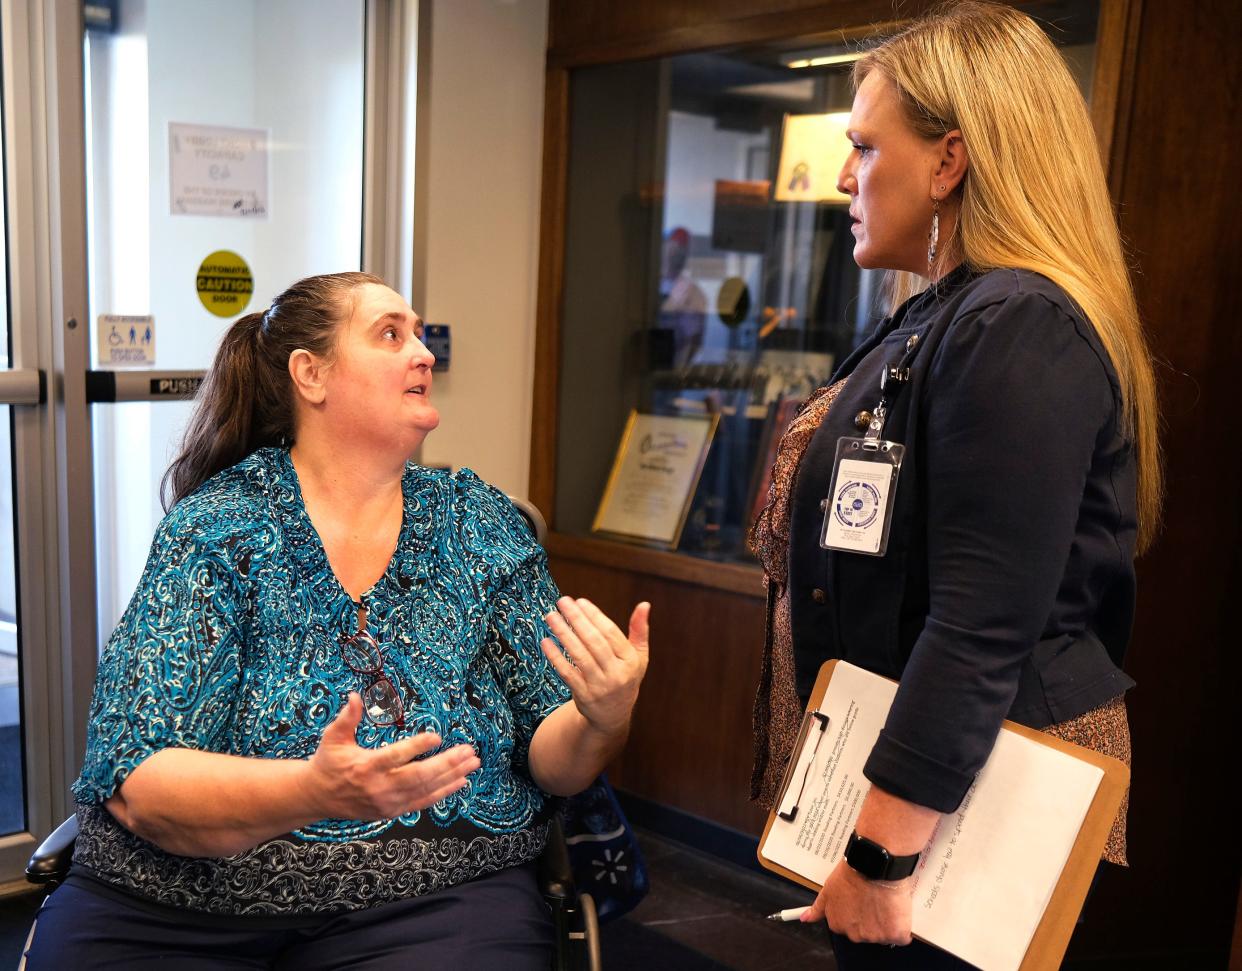 Danni Legg, left, is greeted by school board member Kendra Wesson on Sept. 28 during an Oklahoma State Board of Education meeting at the Hodges building in the Capitol complex.